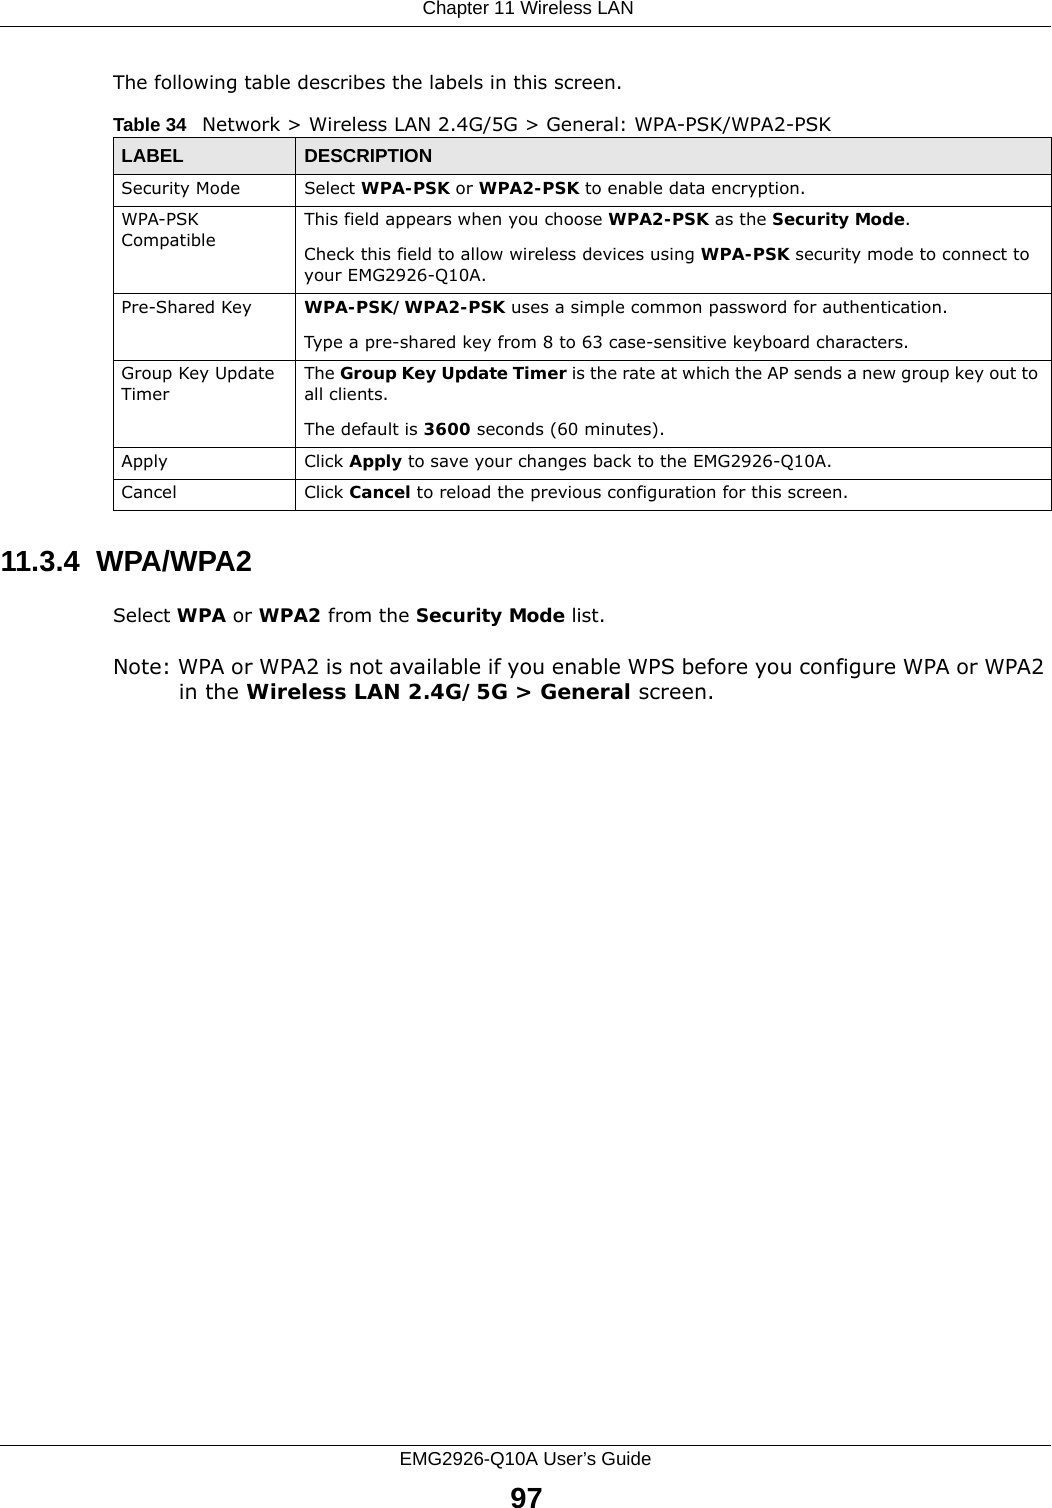  Chapter 11 Wireless LANEMG2926-Q10A User’s Guide97The following table describes the labels in this screen.11.3.4  WPA/WPA2Select WPA or WPA2 from the Security Mode list. Note: WPA or WPA2 is not available if you enable WPS before you configure WPA or WPA2 in the Wireless LAN 2.4G/5G &gt; General screen.Table 34   Network &gt; Wireless LAN 2.4G/5G &gt; General: WPA-PSK/WPA2-PSKLABEL DESCRIPTIONSecurity Mode Select WPA-PSK or WPA2-PSK to enable data encryption.WPA-PSK CompatibleThis field appears when you choose WPA2-PSK as the Security Mode.Check this field to allow wireless devices using WPA-PSK security mode to connect to your EMG2926-Q10A.Pre-Shared Key  WPA-PSK/WPA2-PSK uses a simple common password for authentication.Type a pre-shared key from 8 to 63 case-sensitive keyboard characters.Group Key Update TimerThe Group Key Update Timer is the rate at which the AP sends a new group key out to all clients. The default is 3600 seconds (60 minutes).Apply Click Apply to save your changes back to the EMG2926-Q10A.Cancel Click Cancel to reload the previous configuration for this screen.